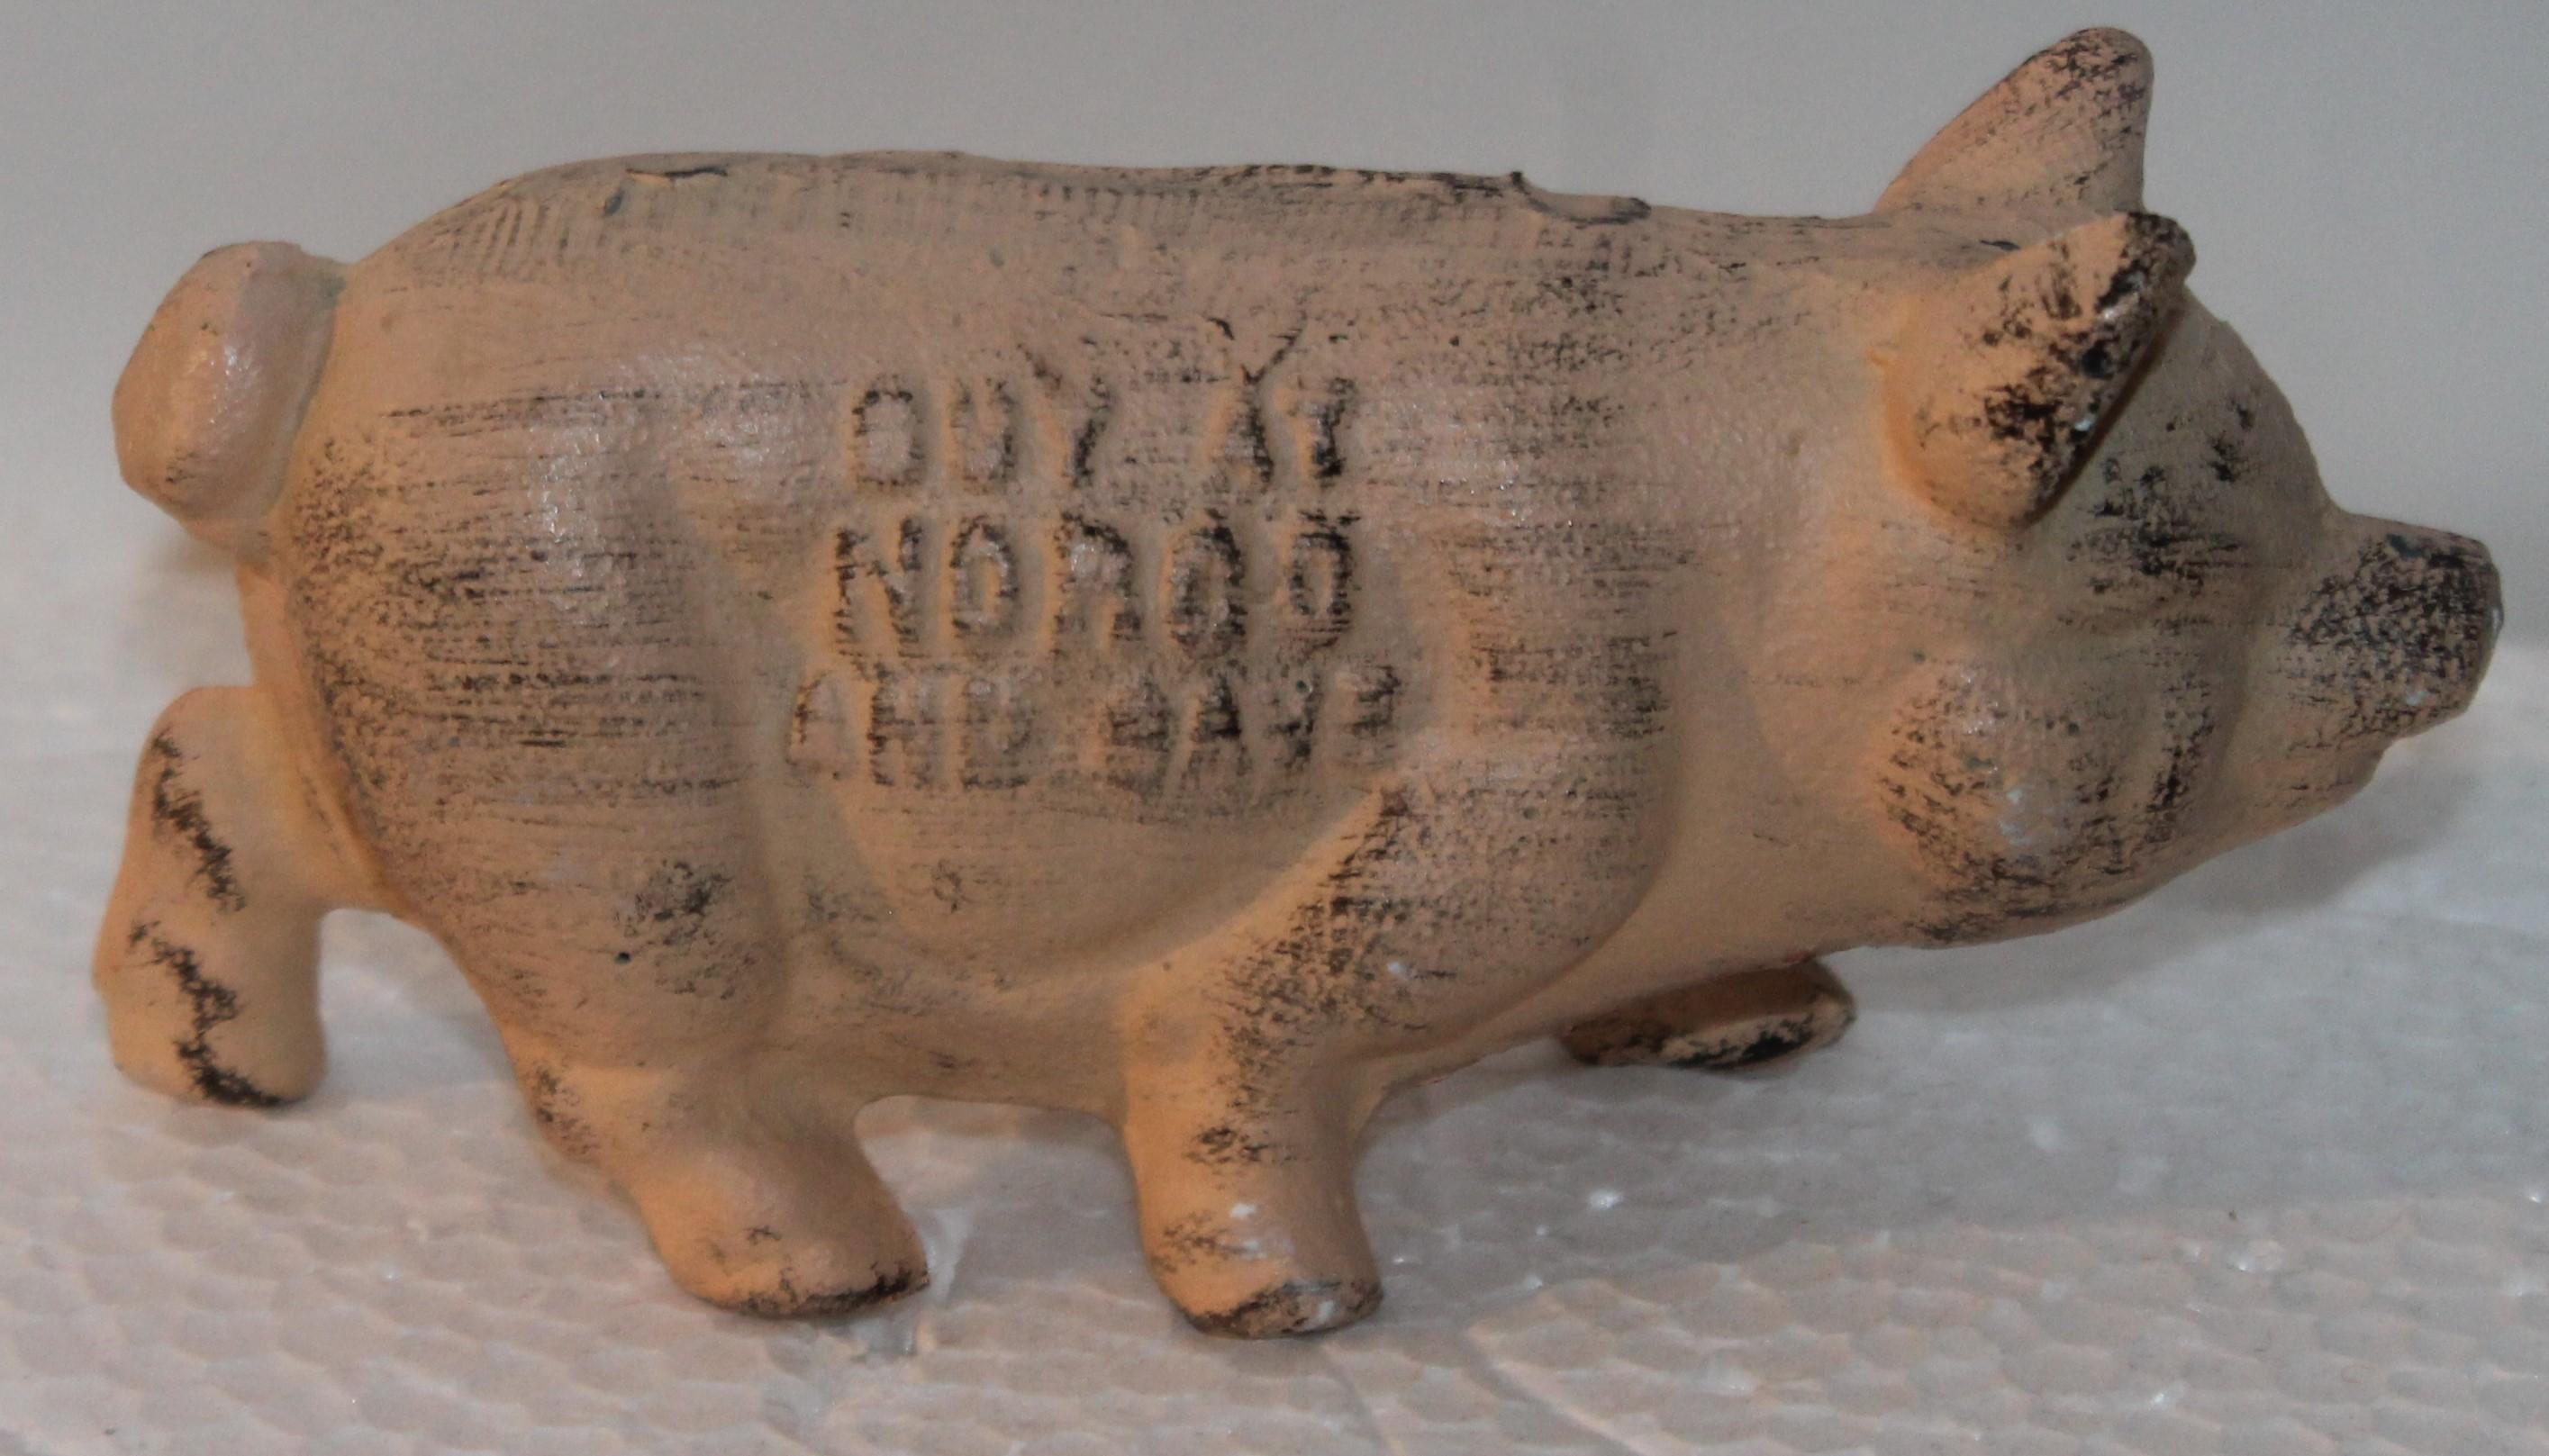 19Th century painted pink cast iron pig from Norco Foundry in Pottstown, Pennsylvania. It states: BUY AT NORCO FOUNDRY AT POTTSTOWN, PENNSYLVANIA. This is a very heavy paper weight or display ad.